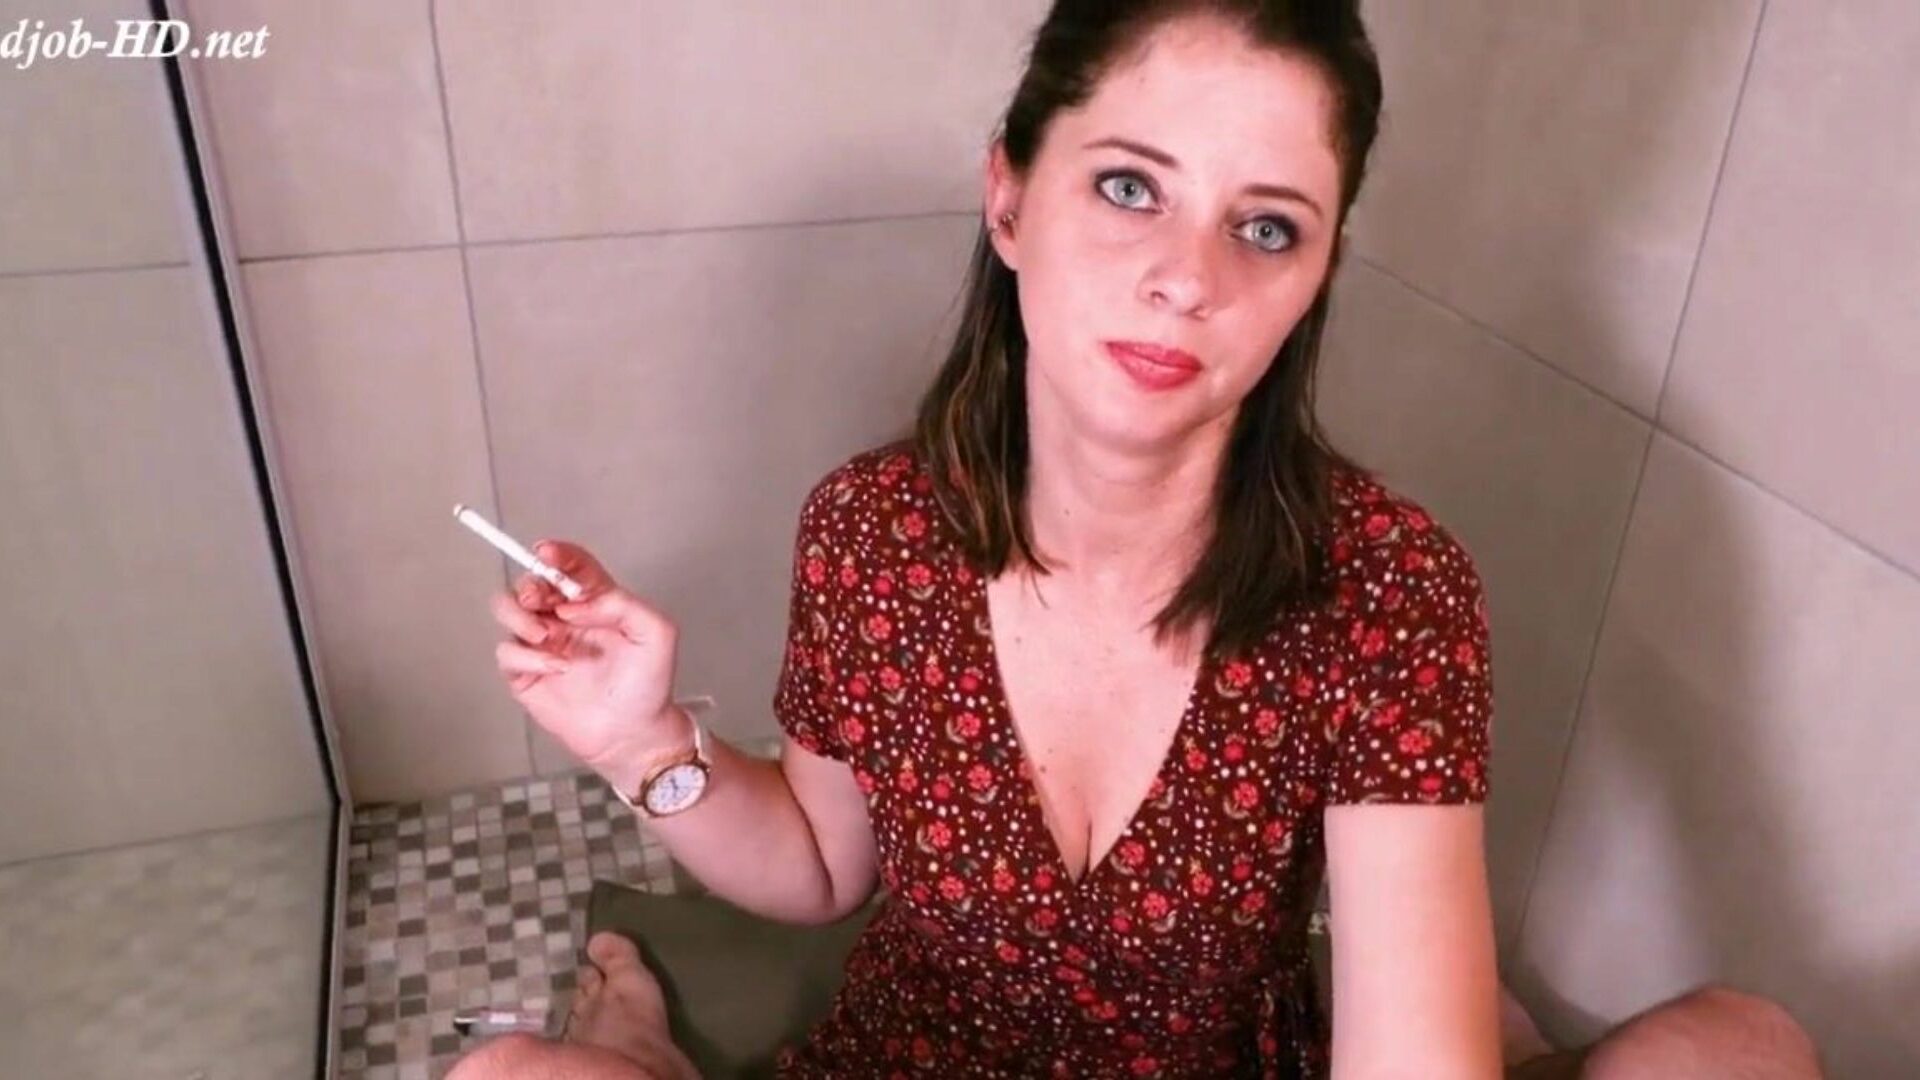 Wristwatch Smoking Hand Job Clean Cum on Watch with... Watch Wristwatch Smoking Hand Job Clean Cum on Watch with Mouth movie scene on xHamster - the ultimate bevy of free-for-all mother I'd like to fuck & Femdom HD porno tube videos